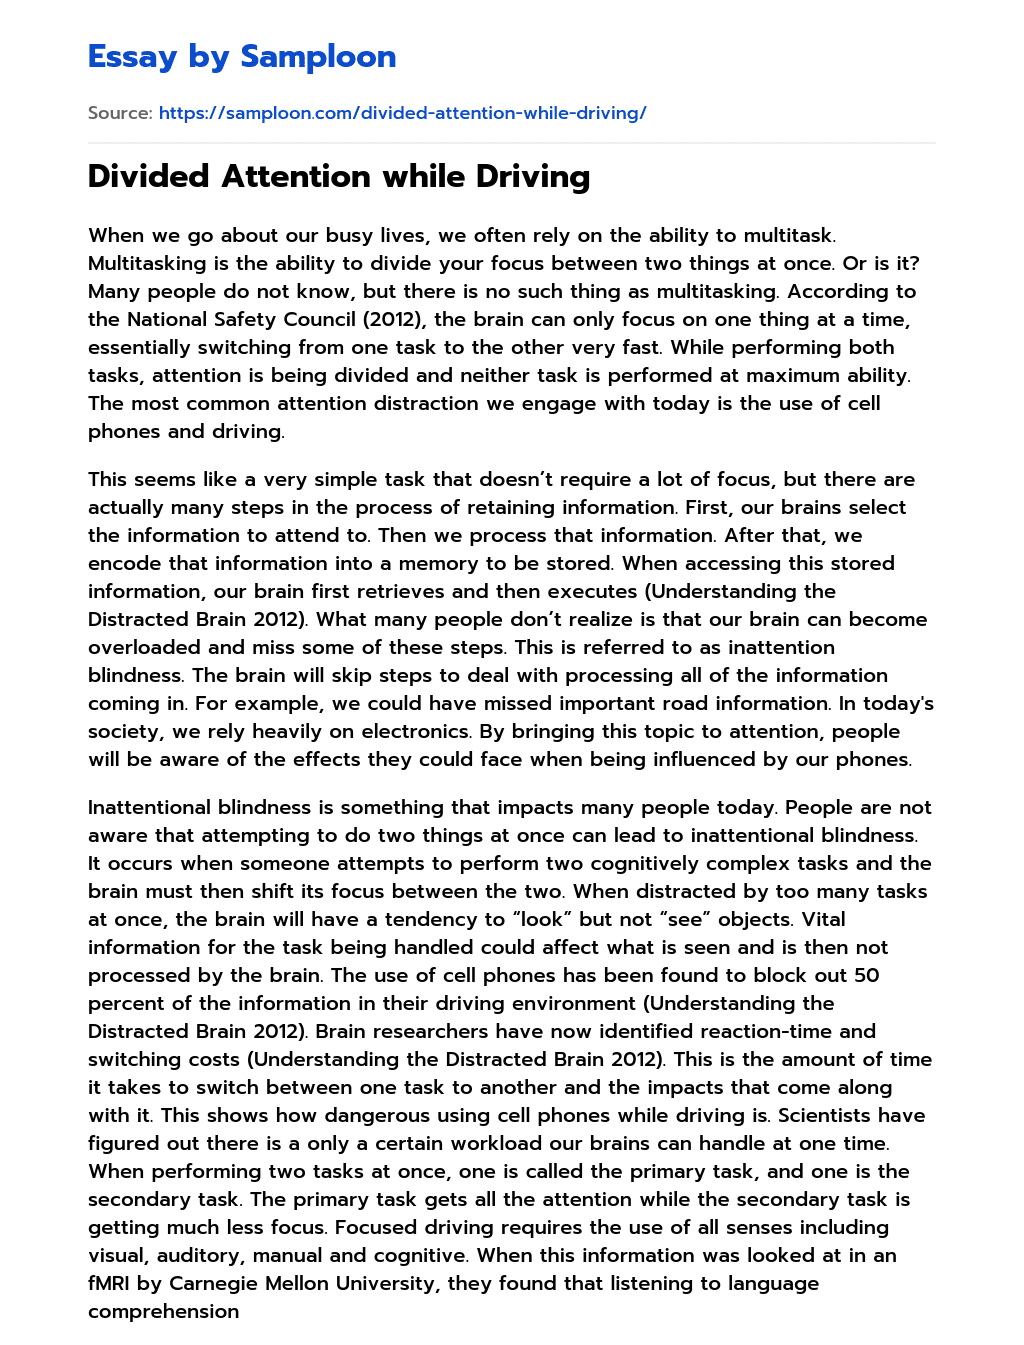 Divided Attention while Driving essay